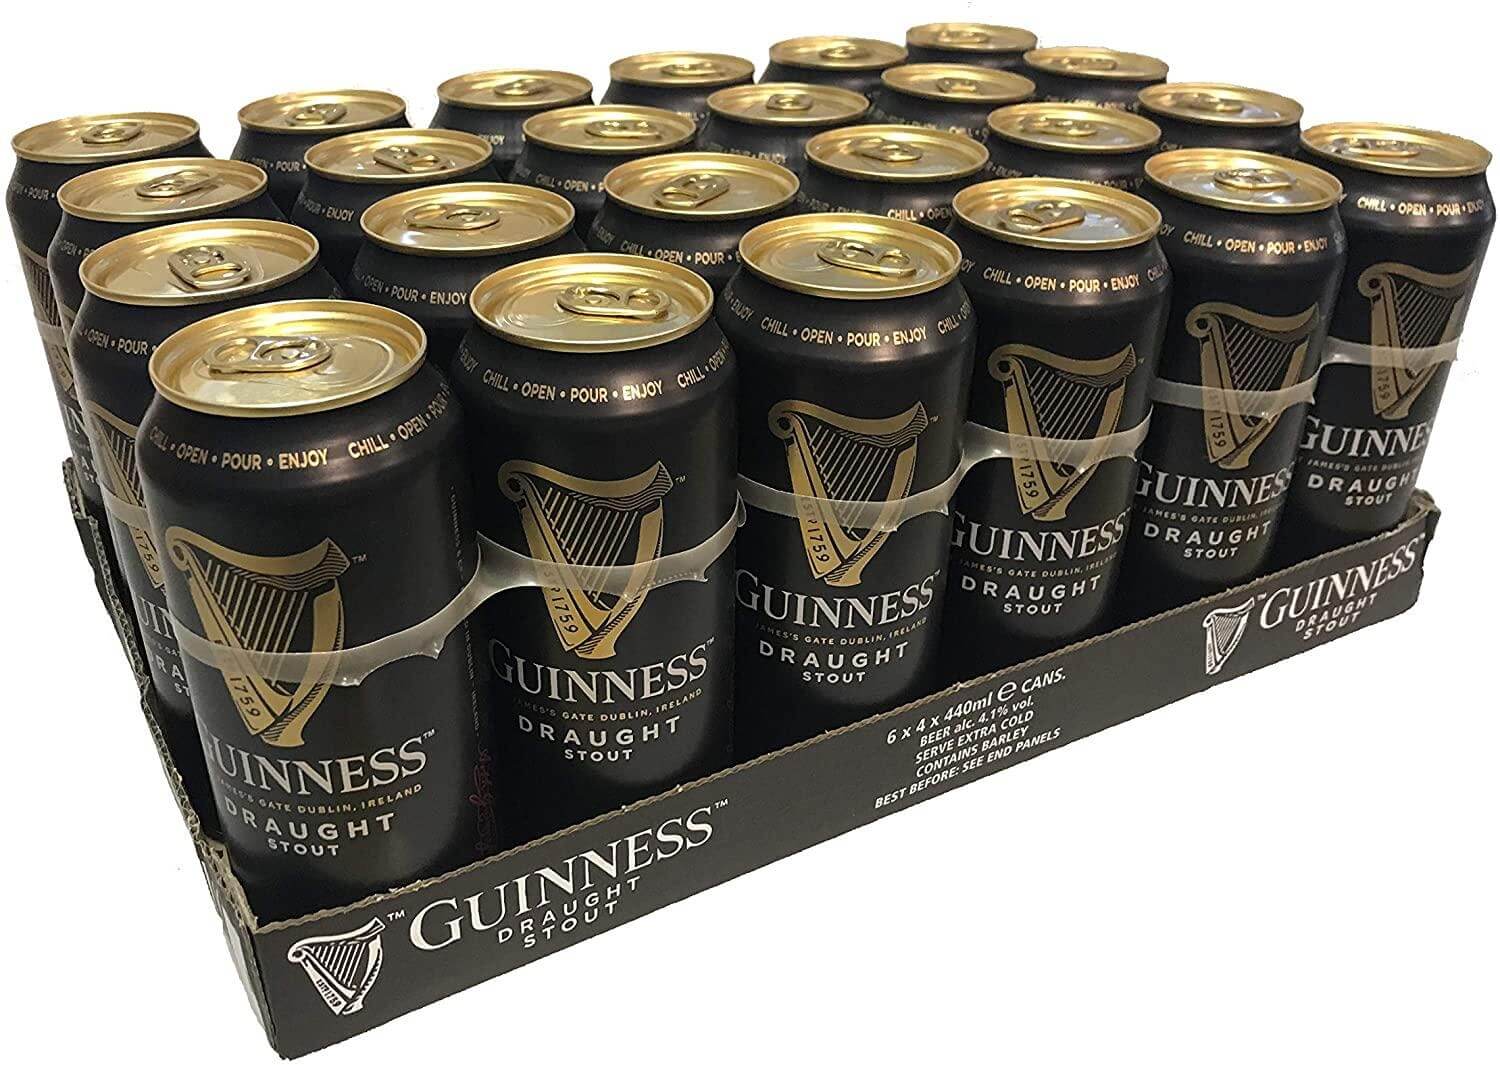 Guinness Draught 4,1% 24x44cl